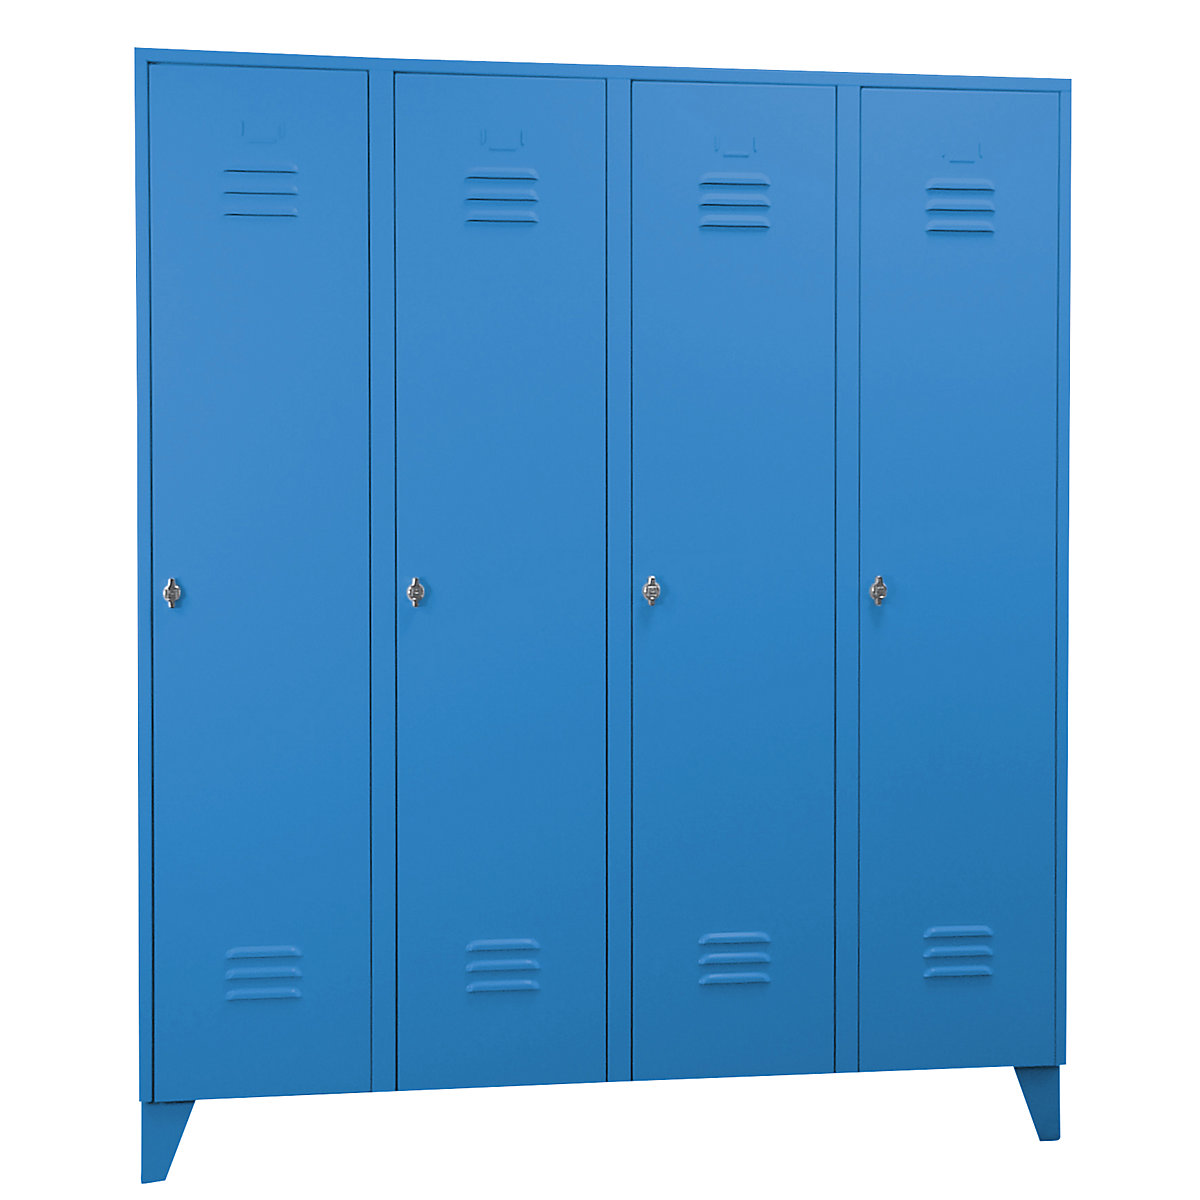 Steel locker with stud feet – Wolf, full height compartments, solid doors, compartment width 400 mm, 4 compartments, light blue-42